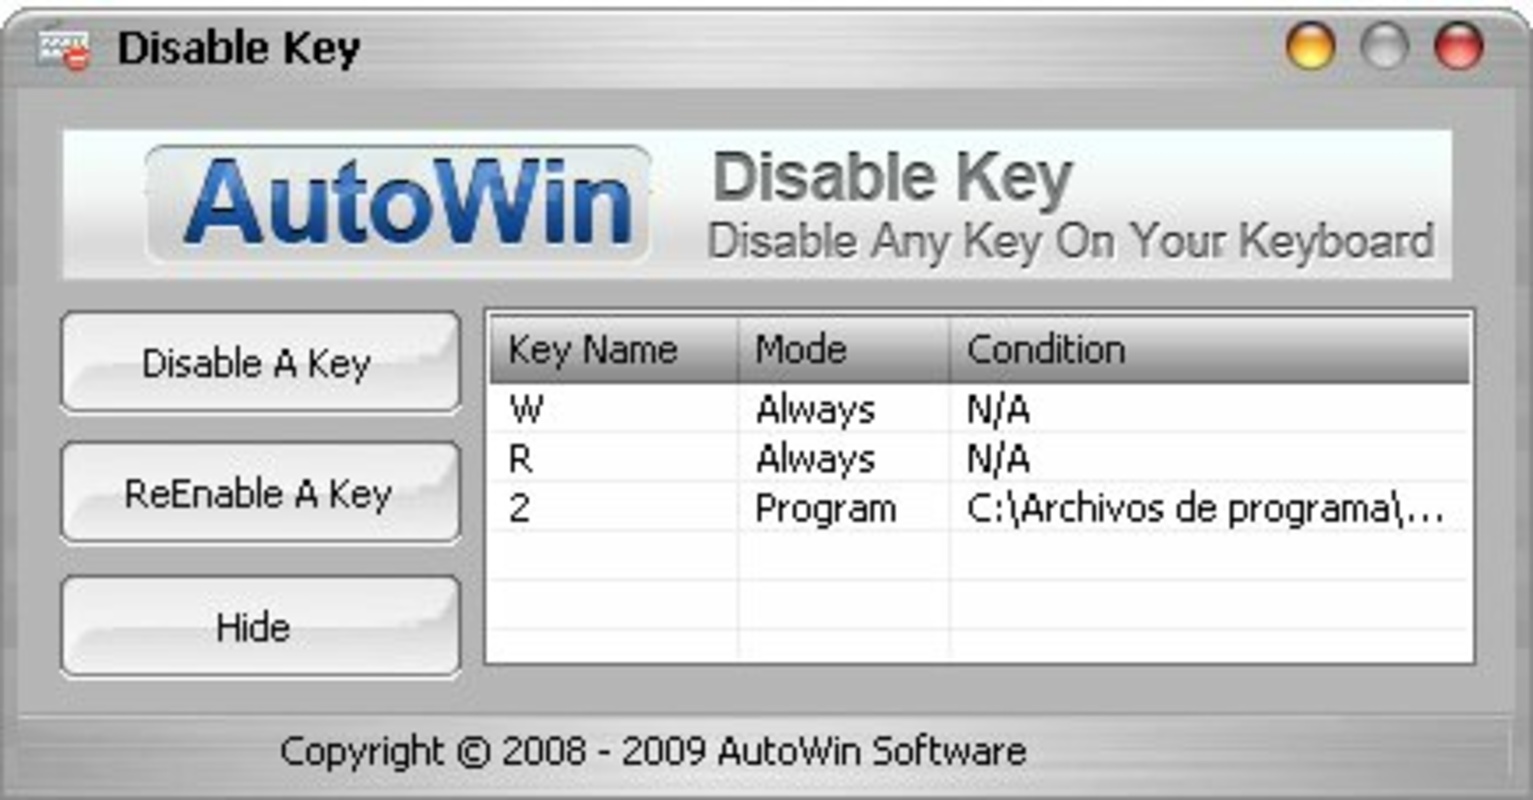 Disable Key feature